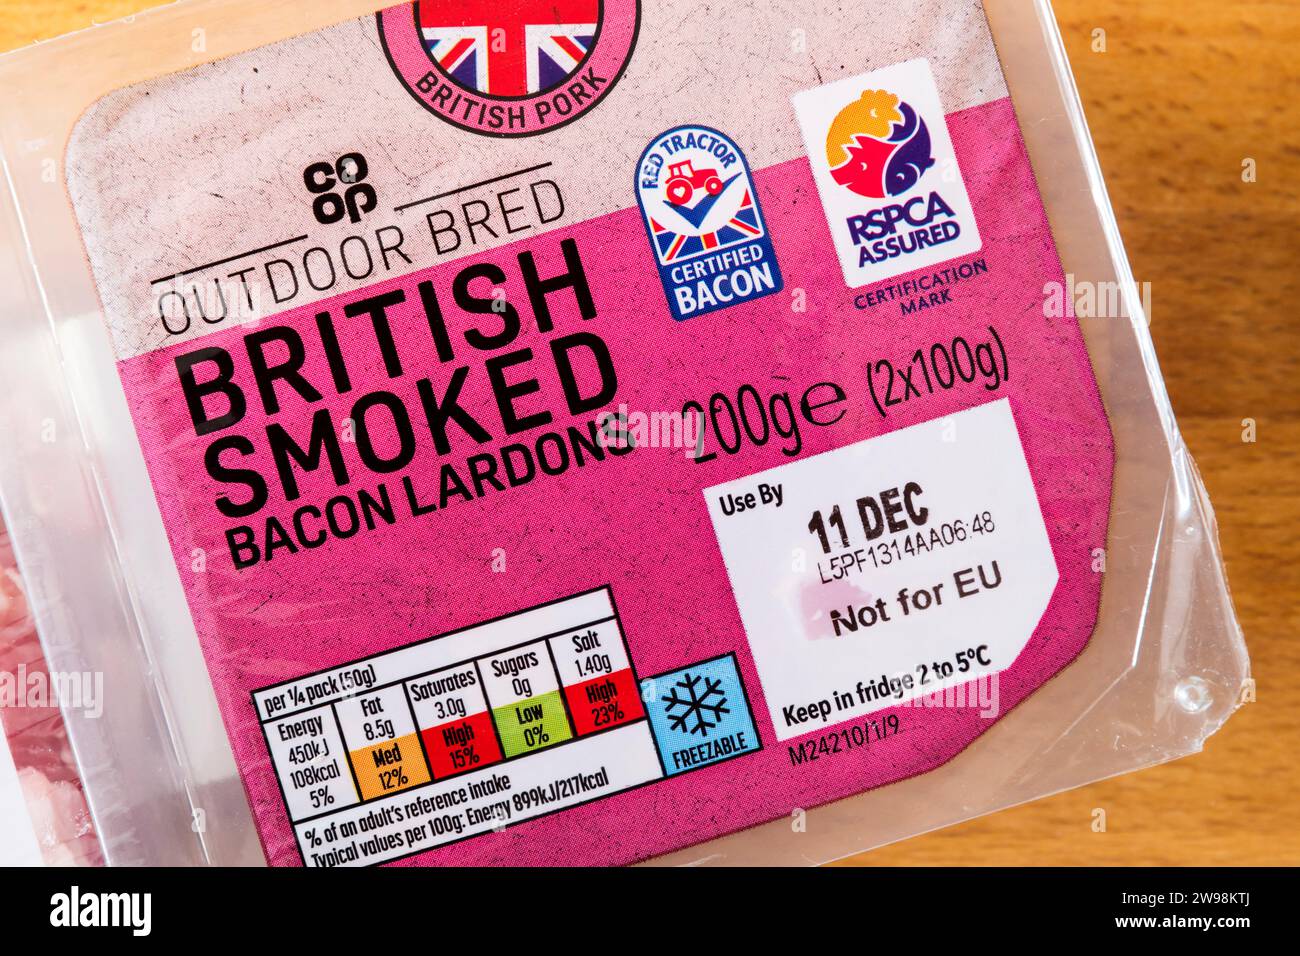 A packet of Co-Op Outdoor Bred British Smoked Bacon Lardons with a Not For EU label. Stock Photo